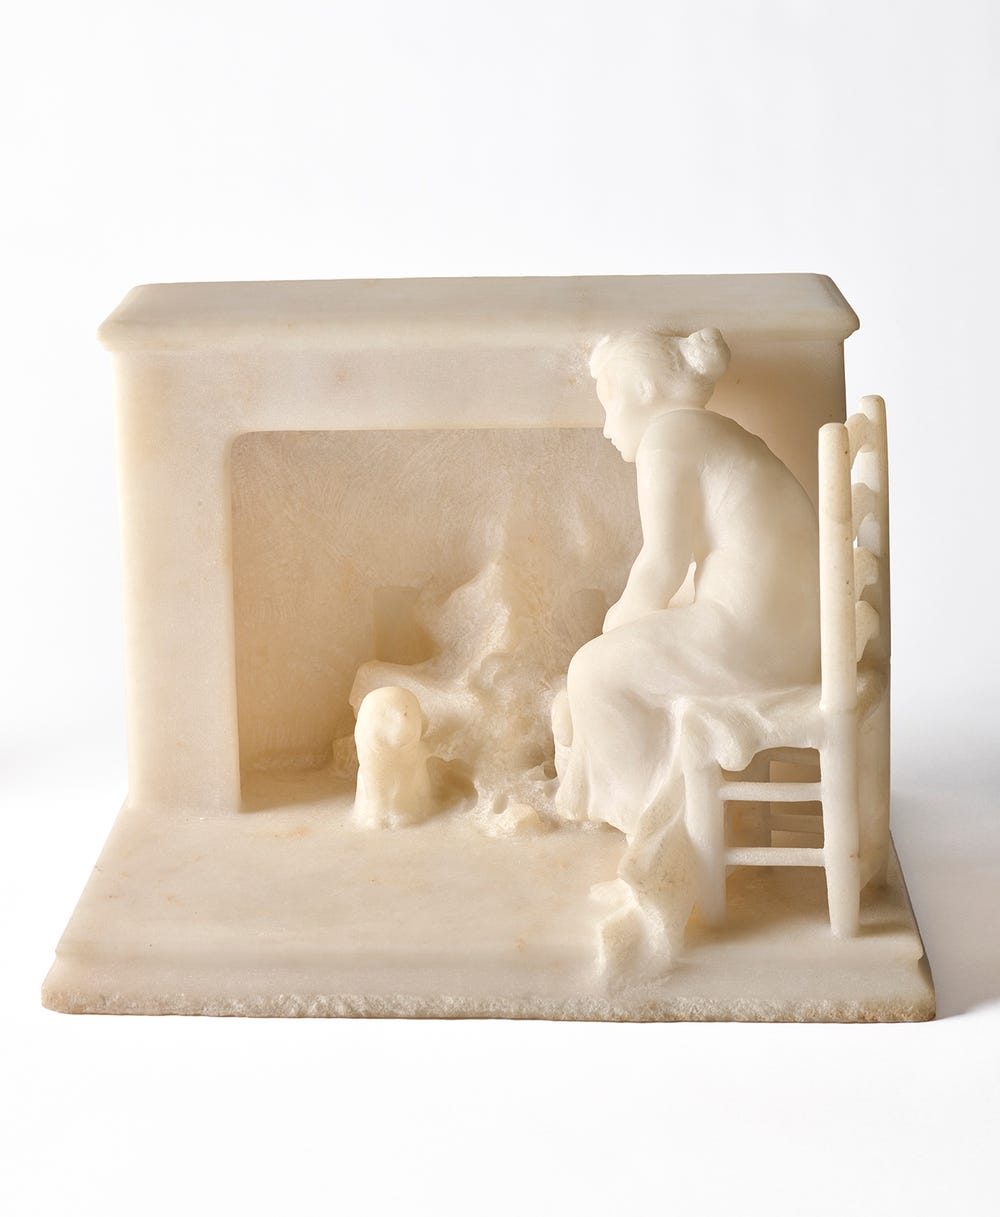 Sculpture of a woman by a fireside by Camille Claudel